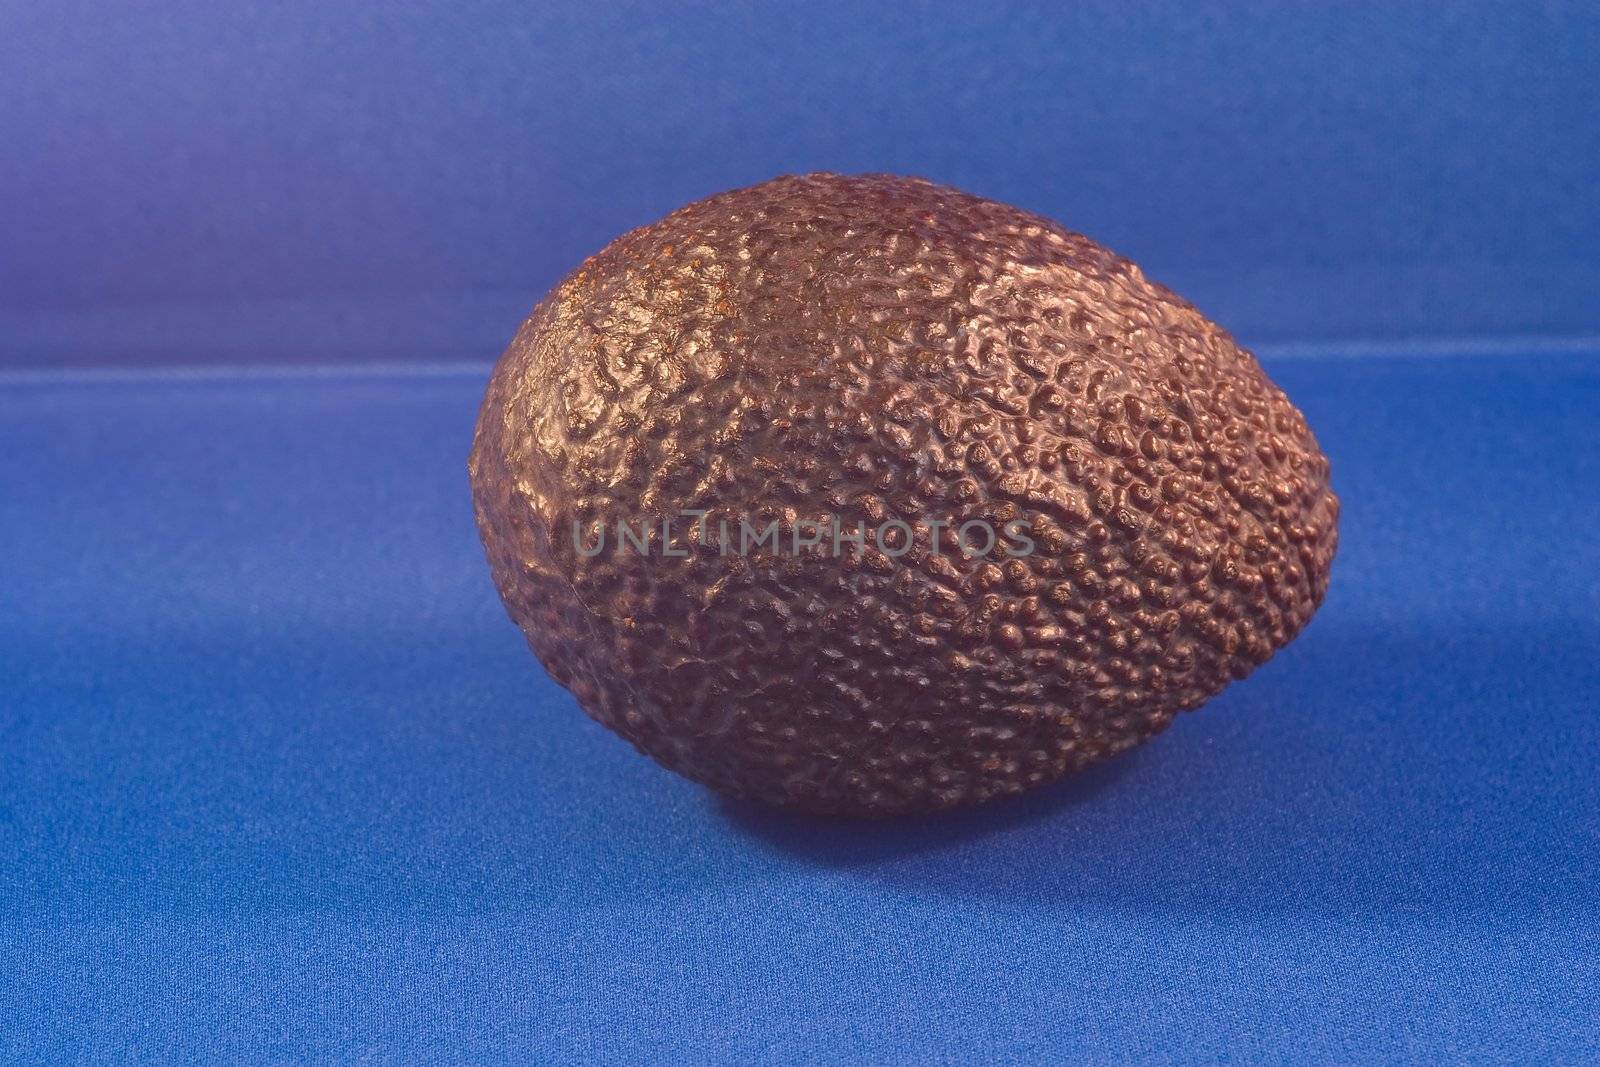 The avocado (Persea americana) is a tree native to Mexico, Central America, and Guam, classified in the flowering plant family Lauraceae. The name "avocado" also refers to the fruit of the tree with an egg-shaped pit. P. americana has a long history of being cultivated in Central and South America; a water jar shaped like an avocado, dating to A.D. 900, was discovered in the pre-Incan city of Chan Chan